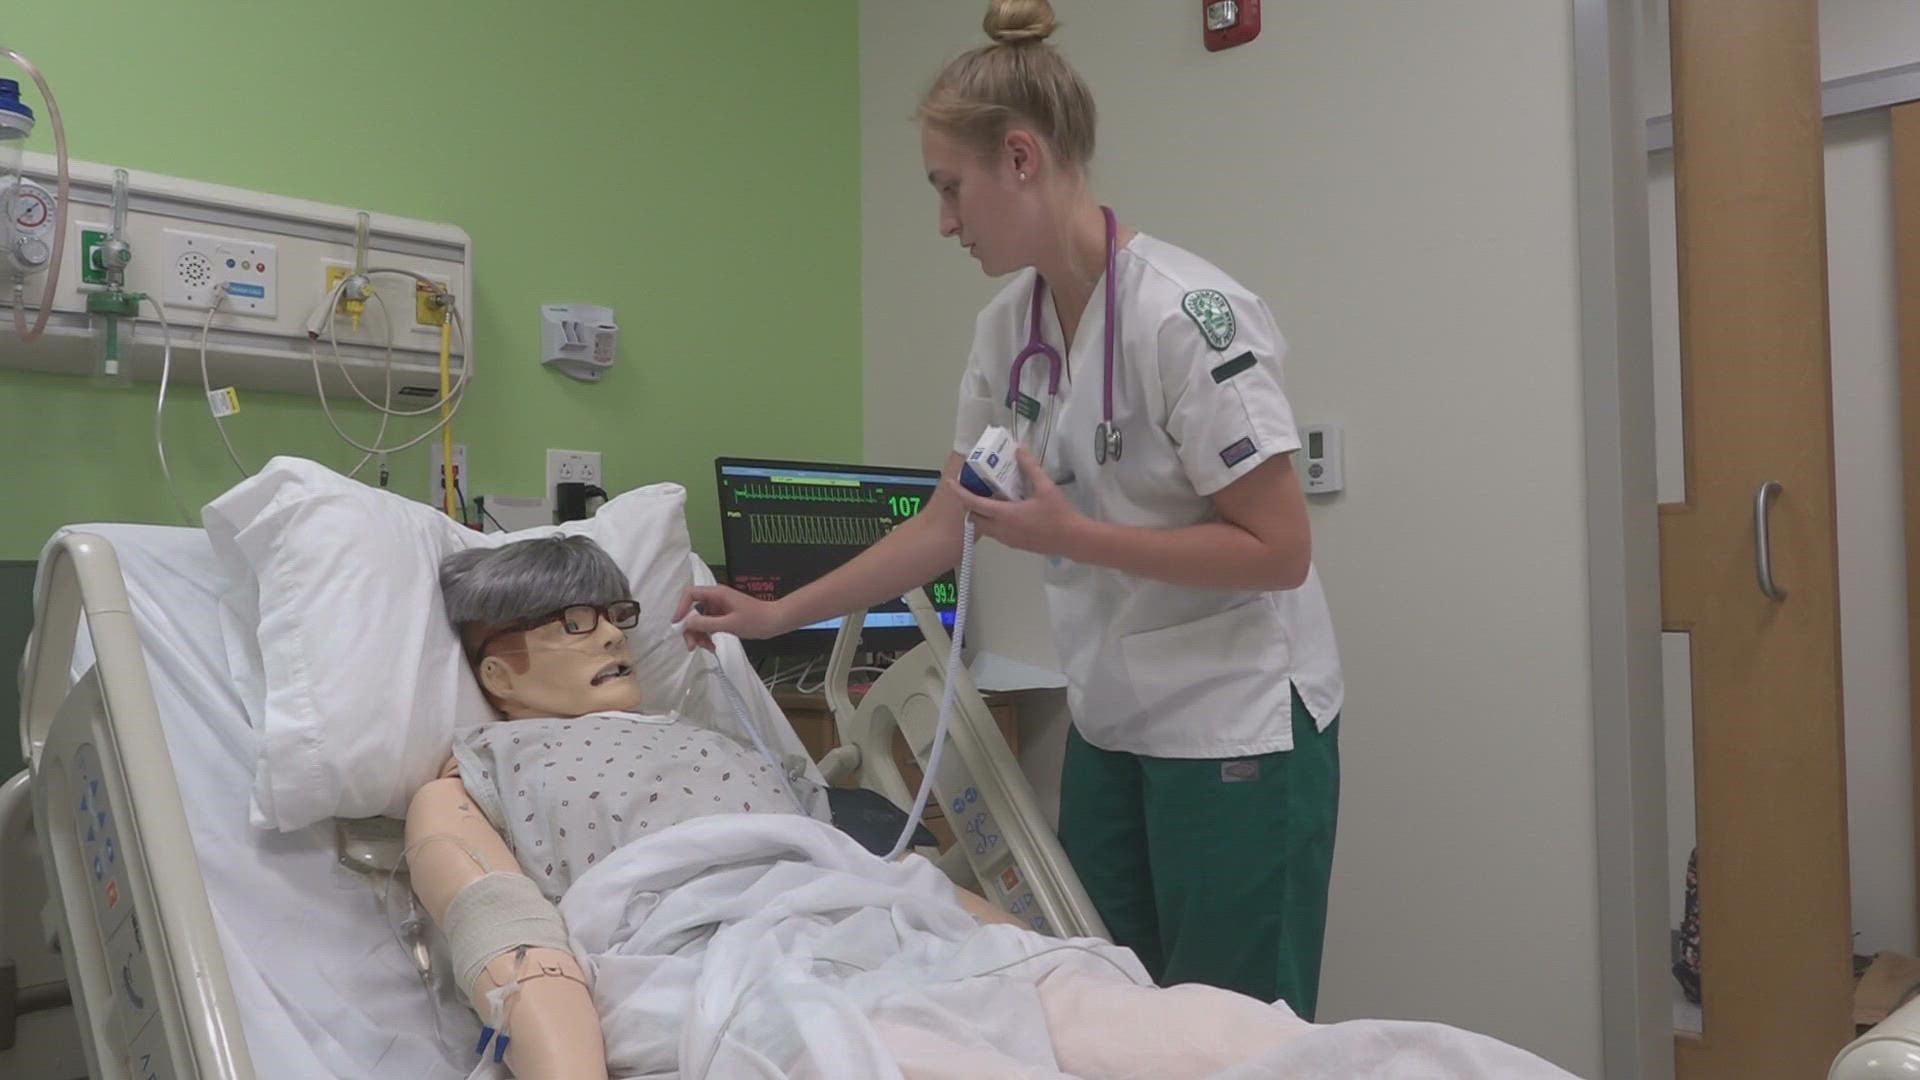 "Husson is really putting all their resources into nursing education right now," Husson's chief nursing administrator said.